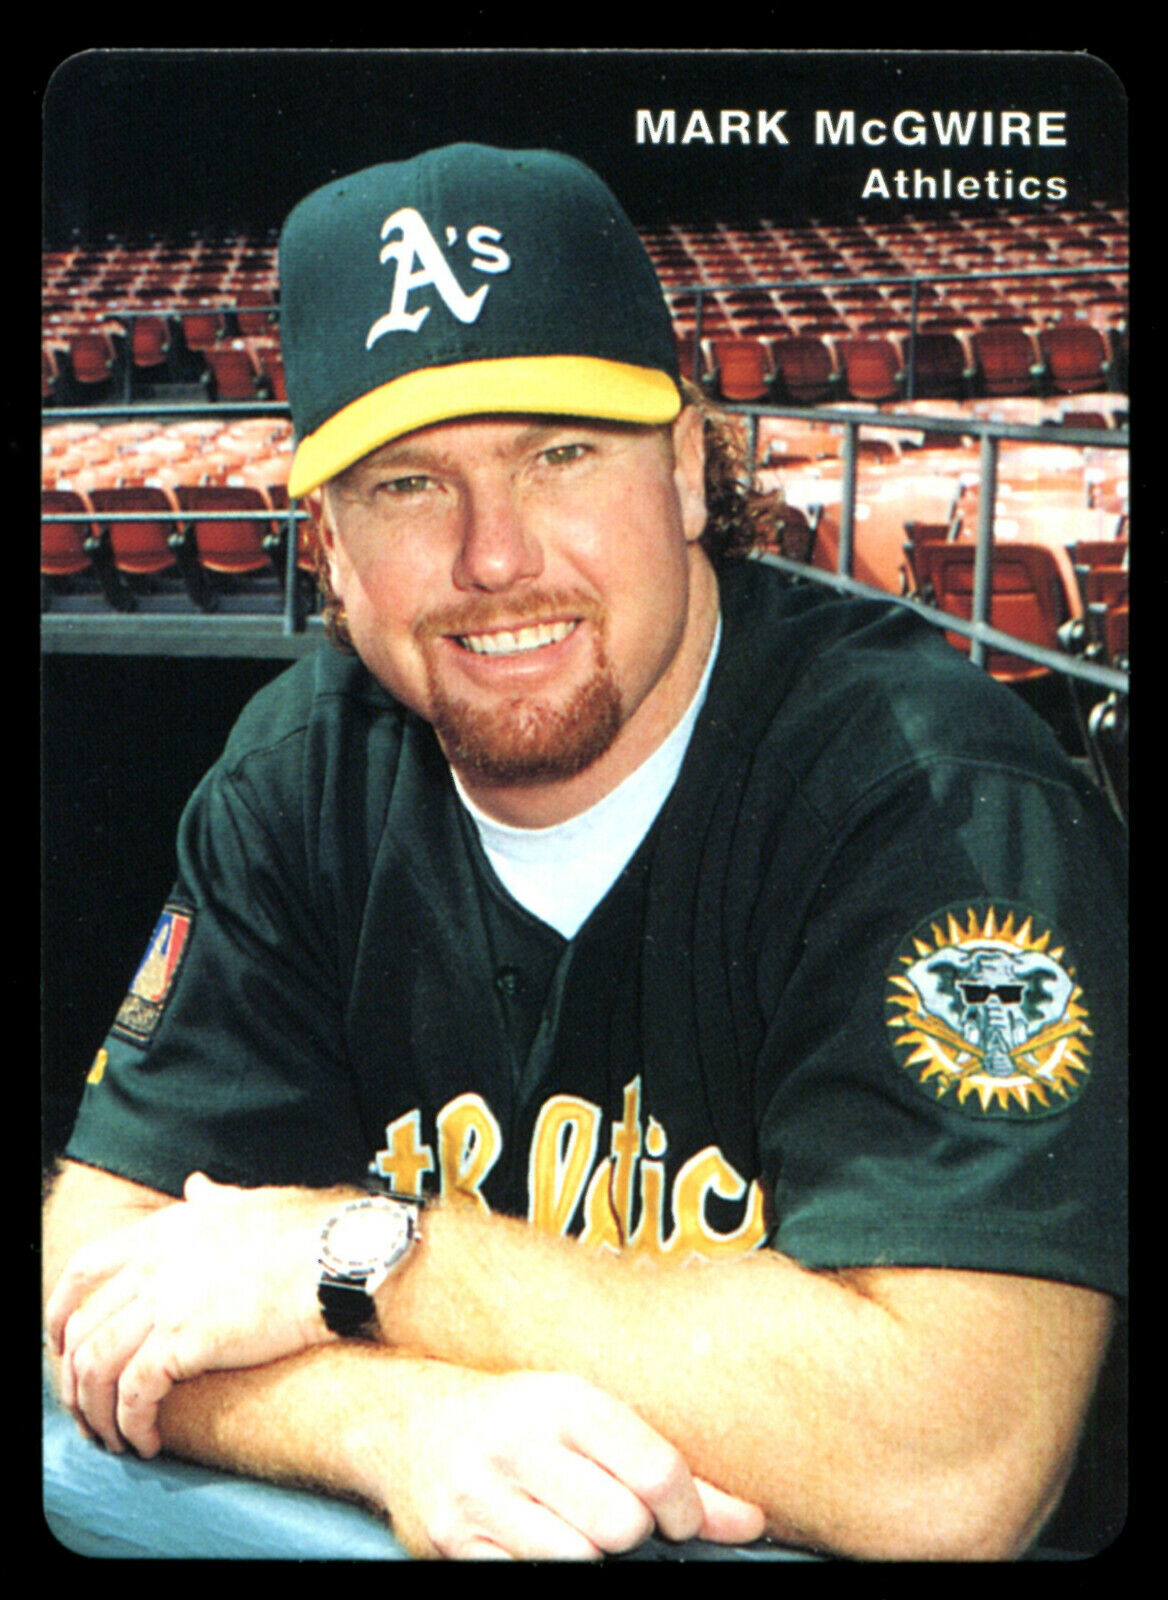 Mothers Cookies MARK MCGWIRE OAKLAND ATHLETICS A'S 12 Different Без бренда - фотография #9